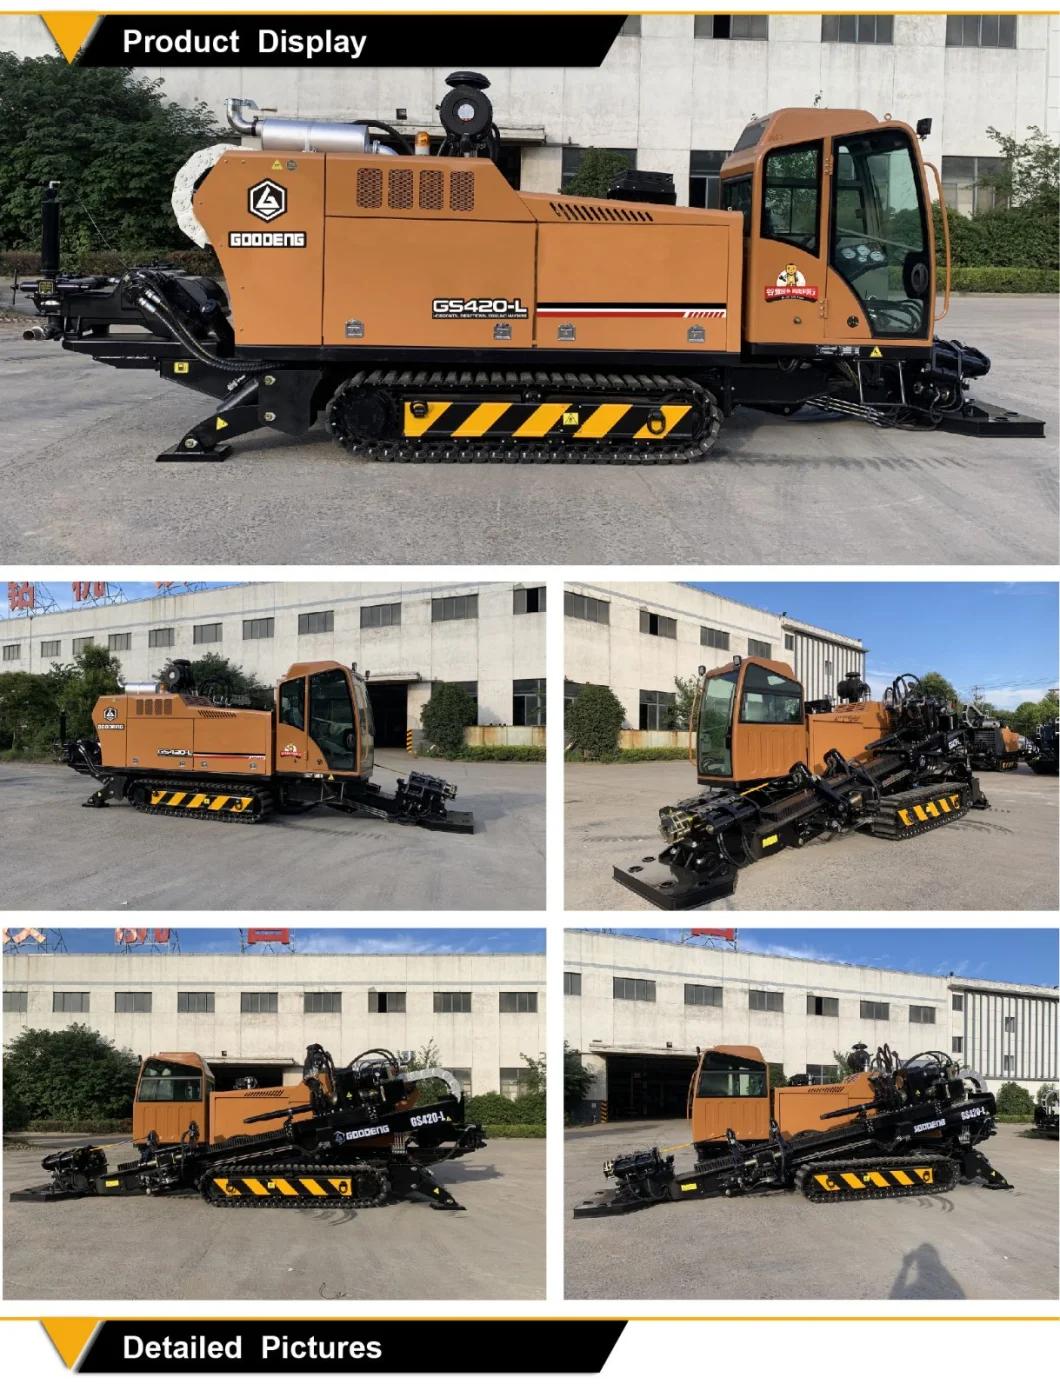 GS420-LS trenchless machine high efficiency horizontal directional drilling machine